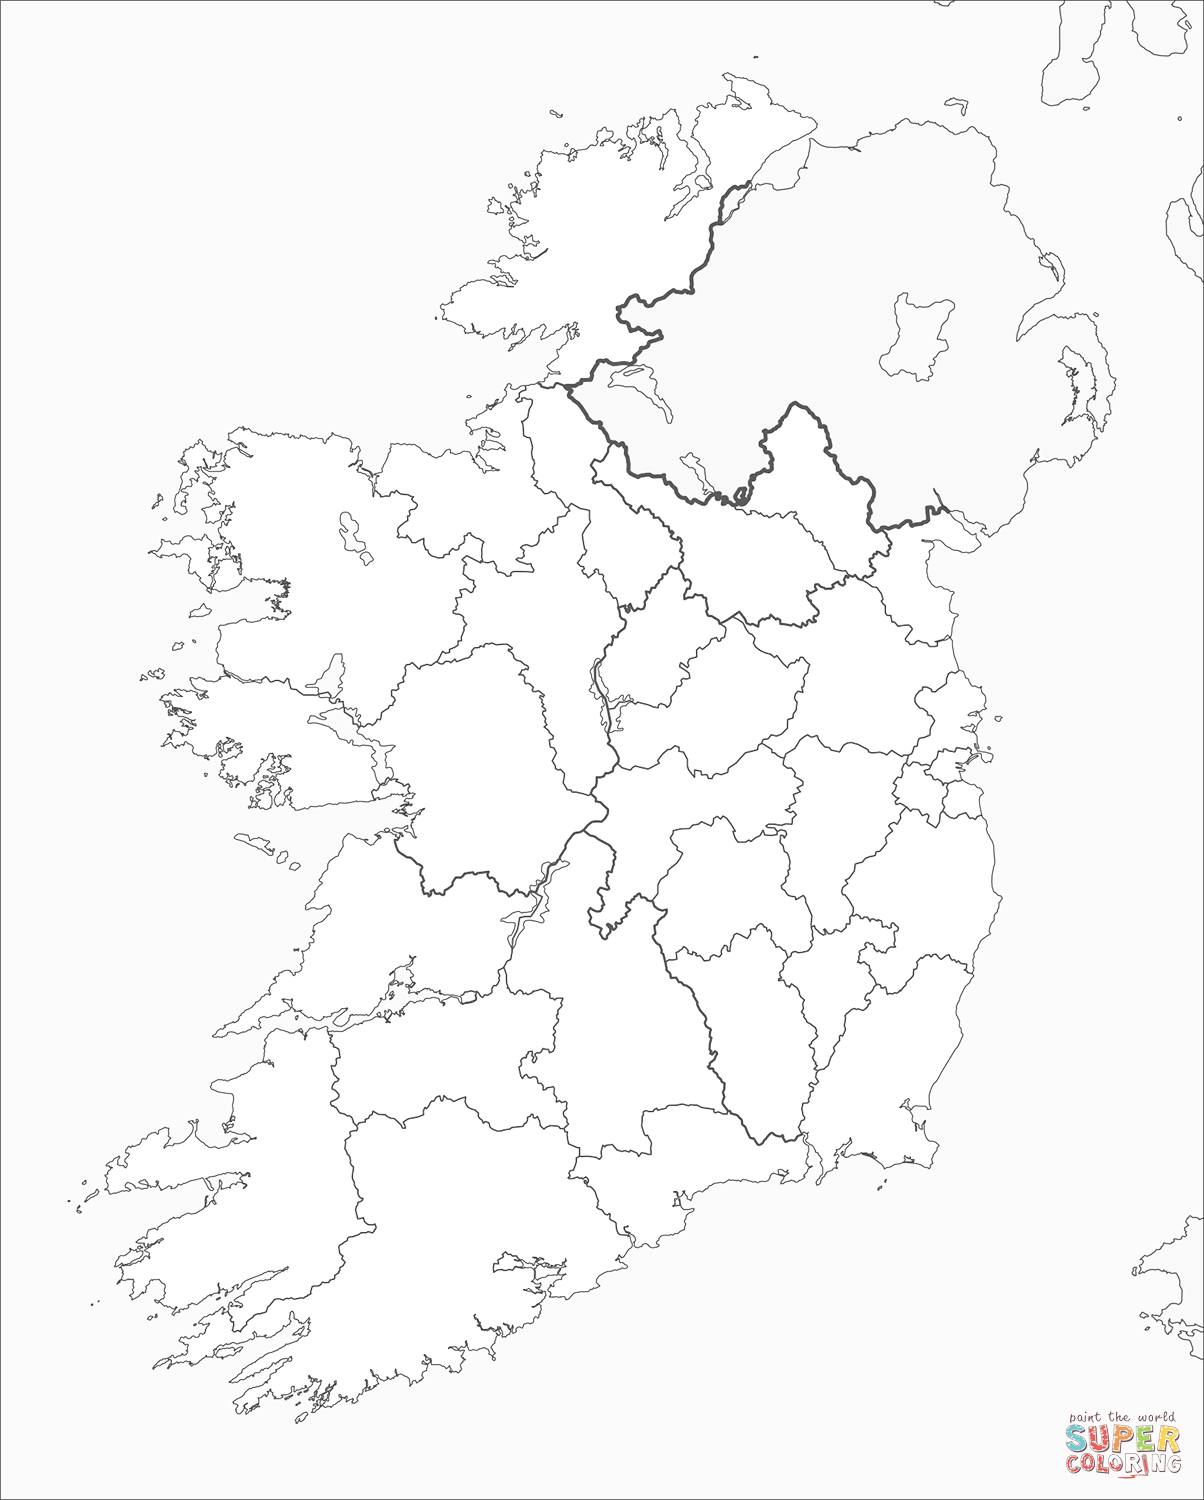 Ireland map coloring page free printable coloring pages